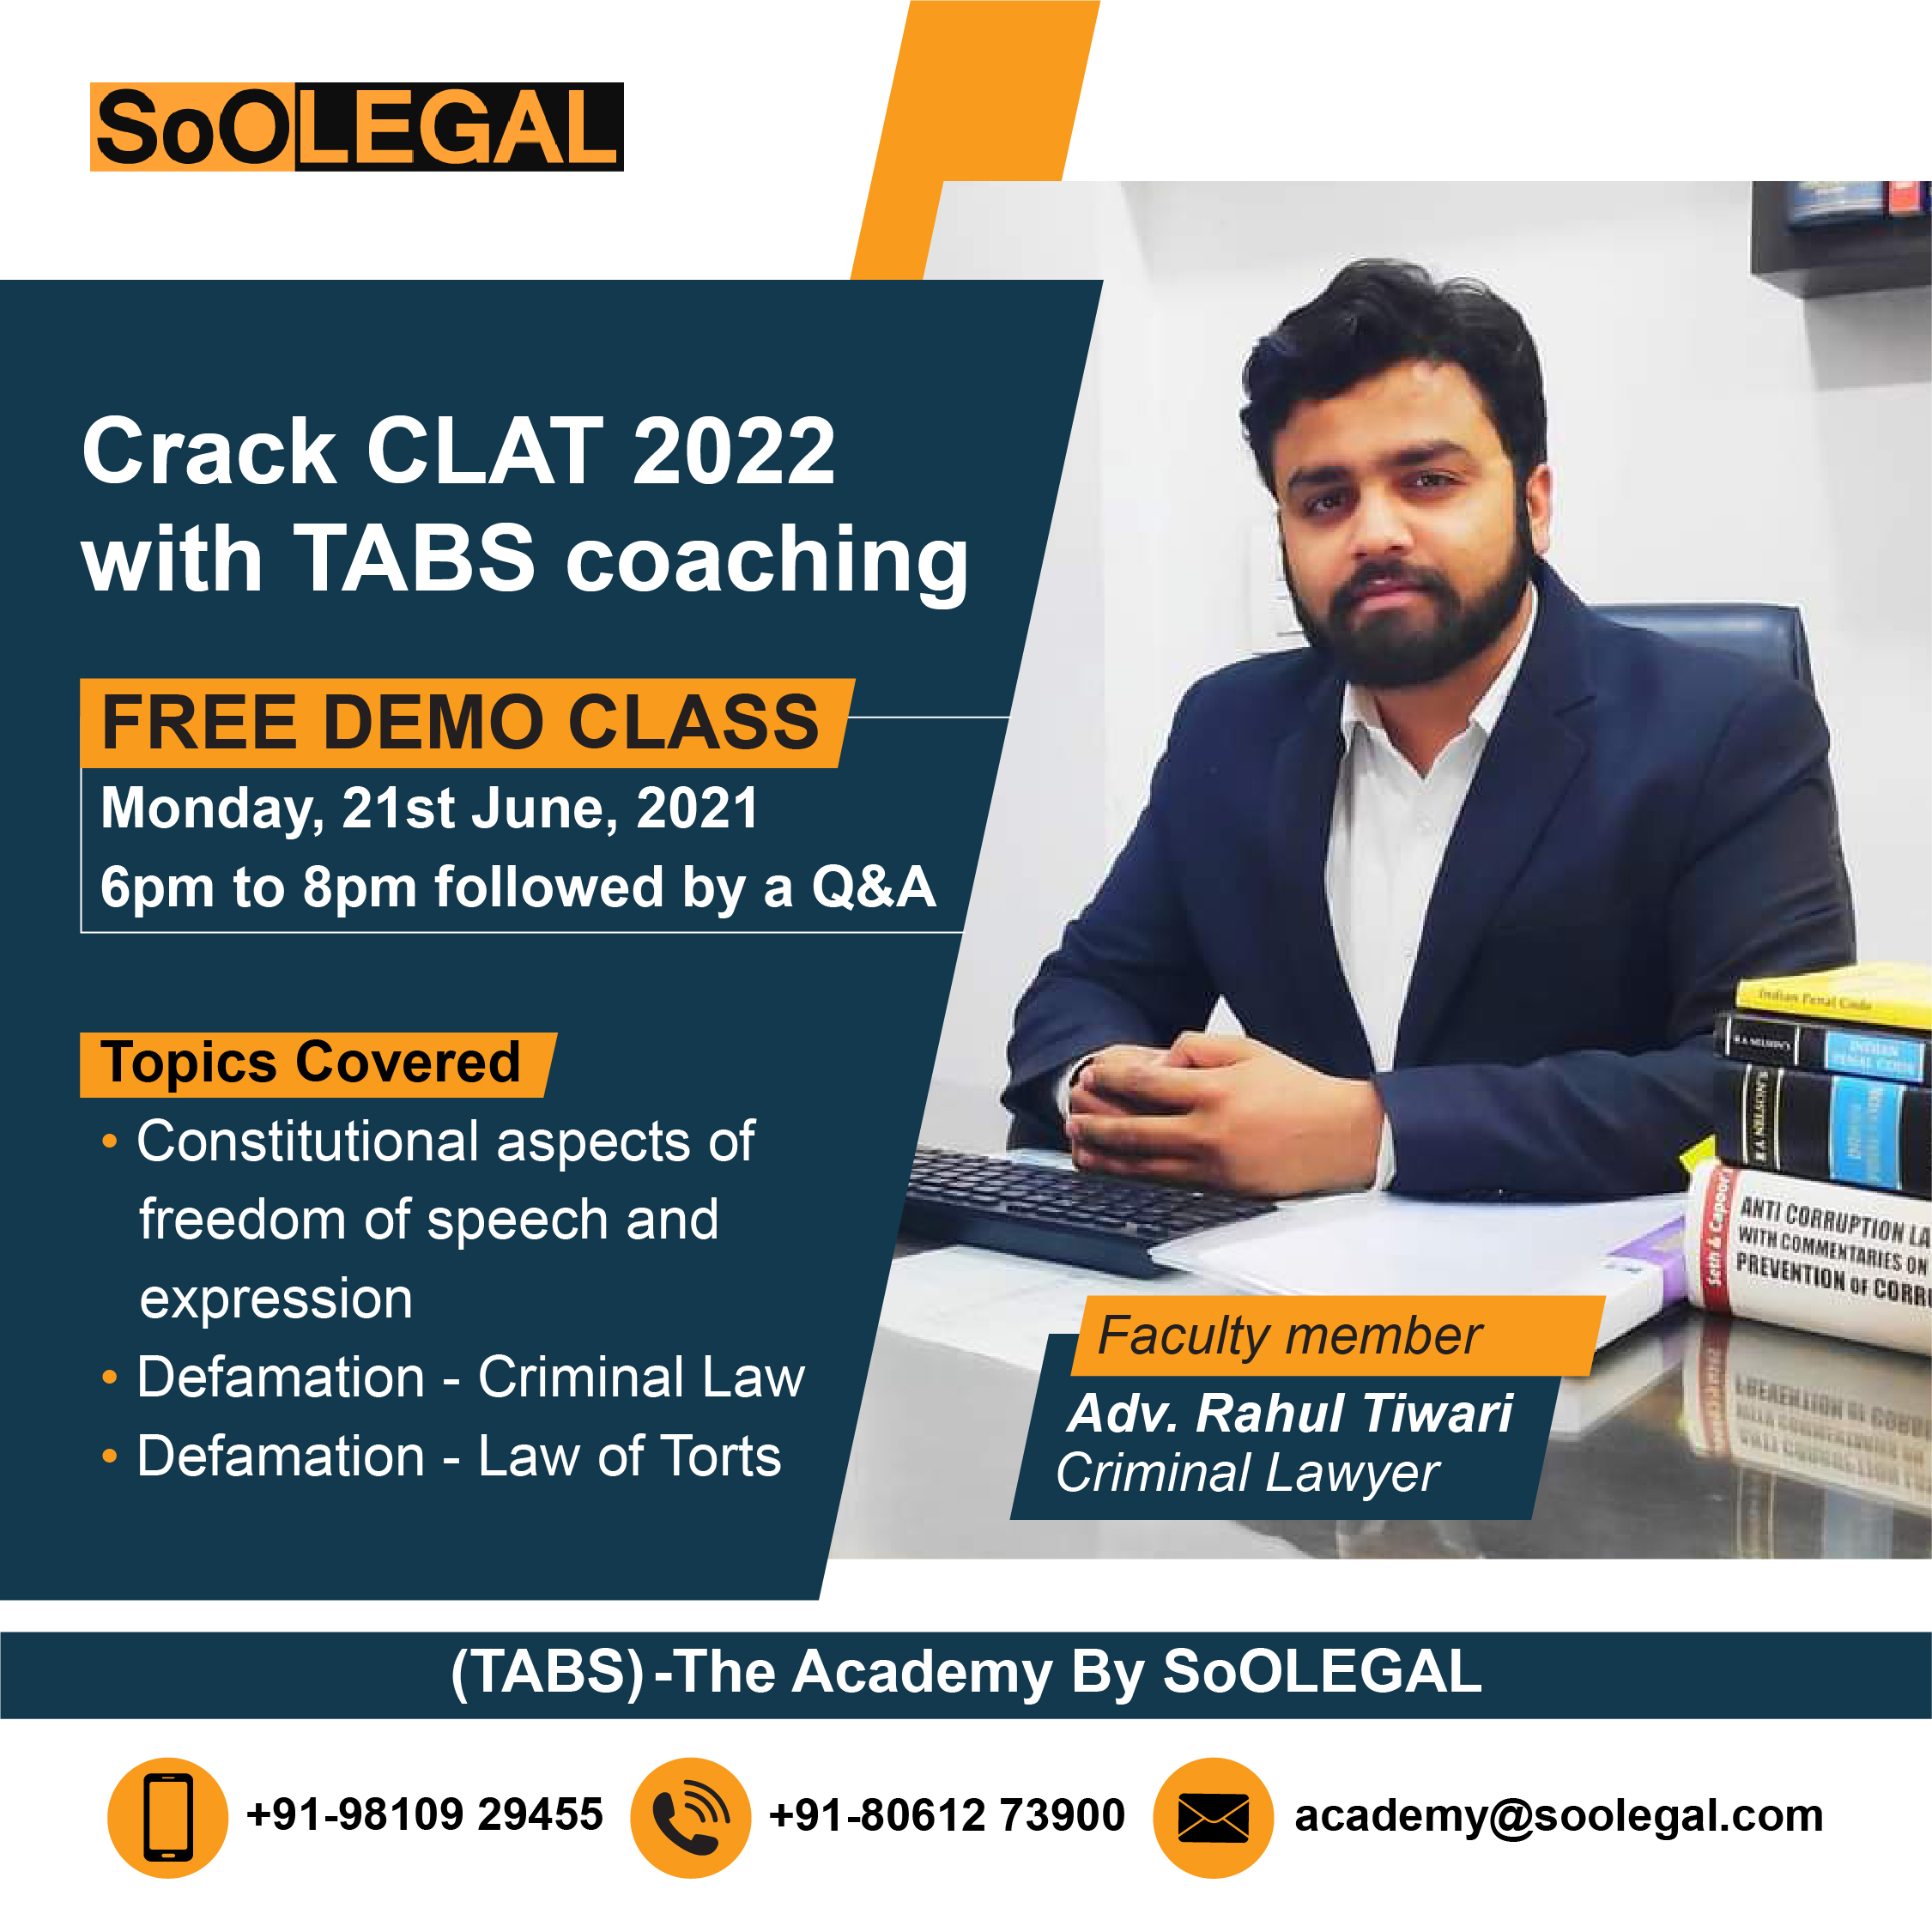 Free Demo Class - Crack CLAT 2022 with TABS coaching